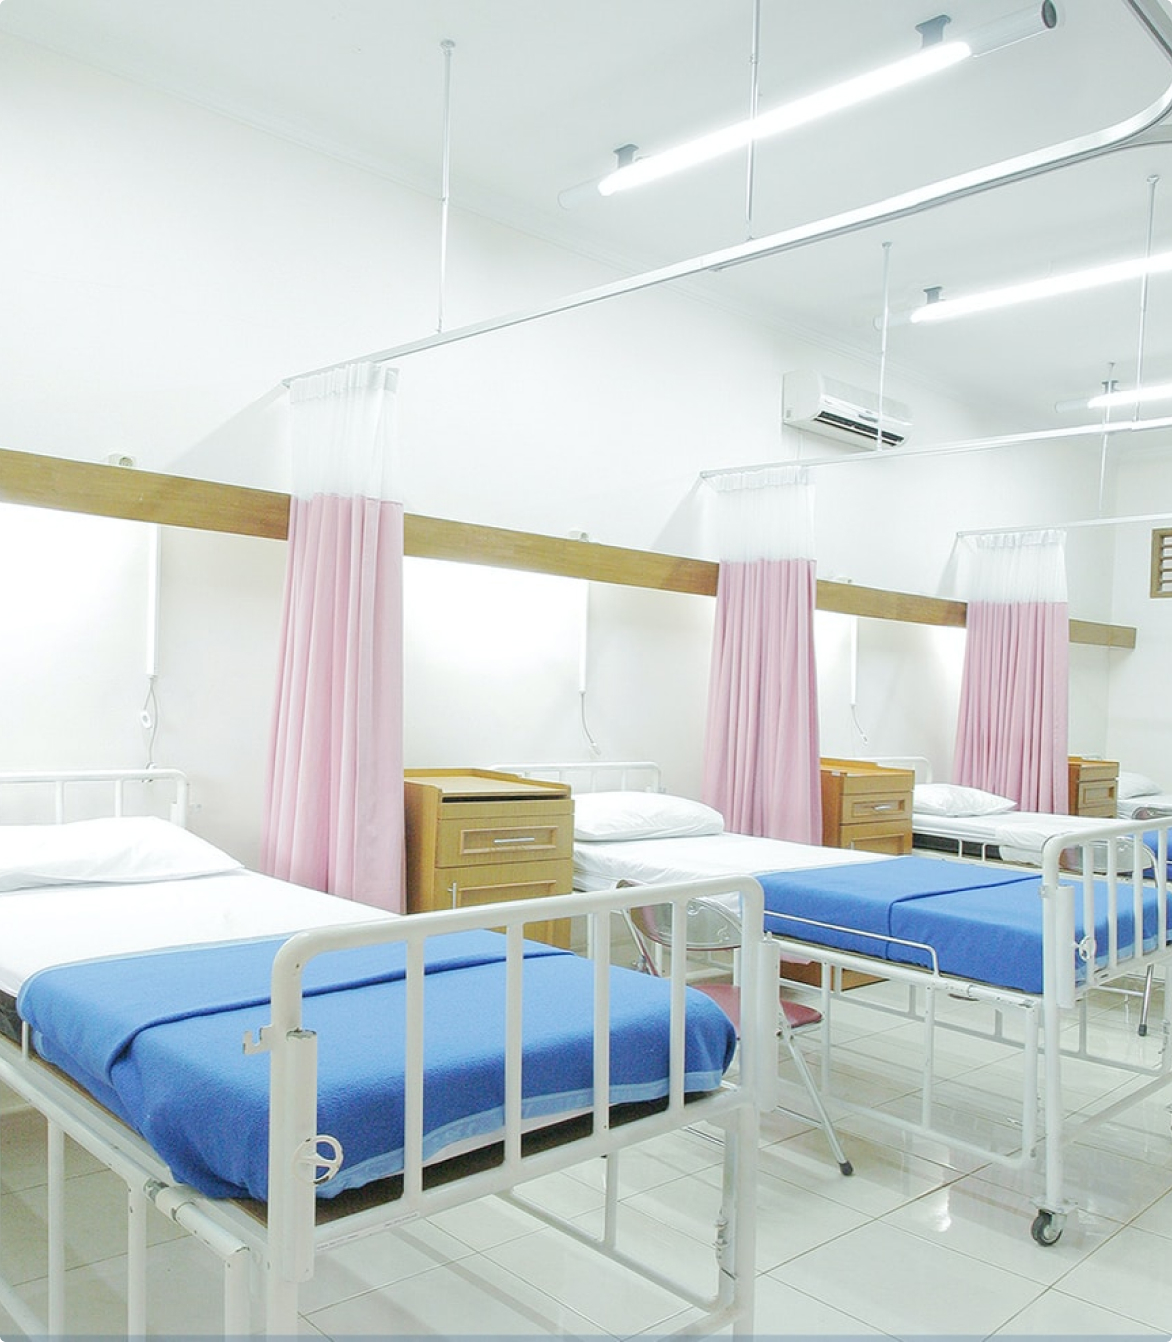 hospital room with medical beds.